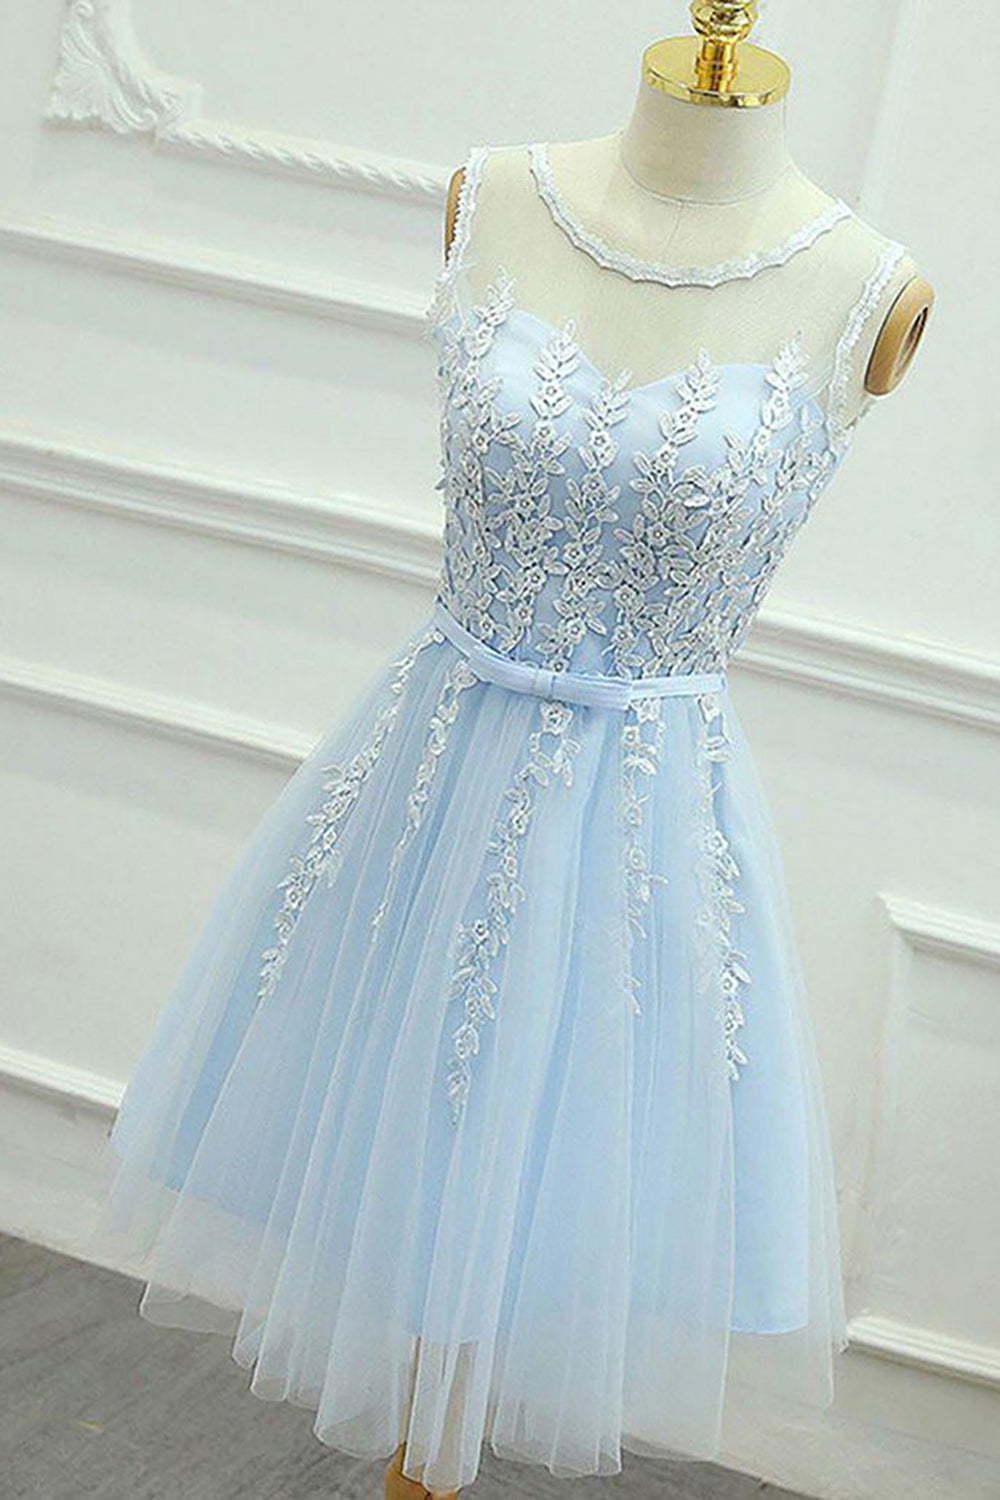 Homecoming Dress Lace, Blue Round Neck A Line Homecoming Dress